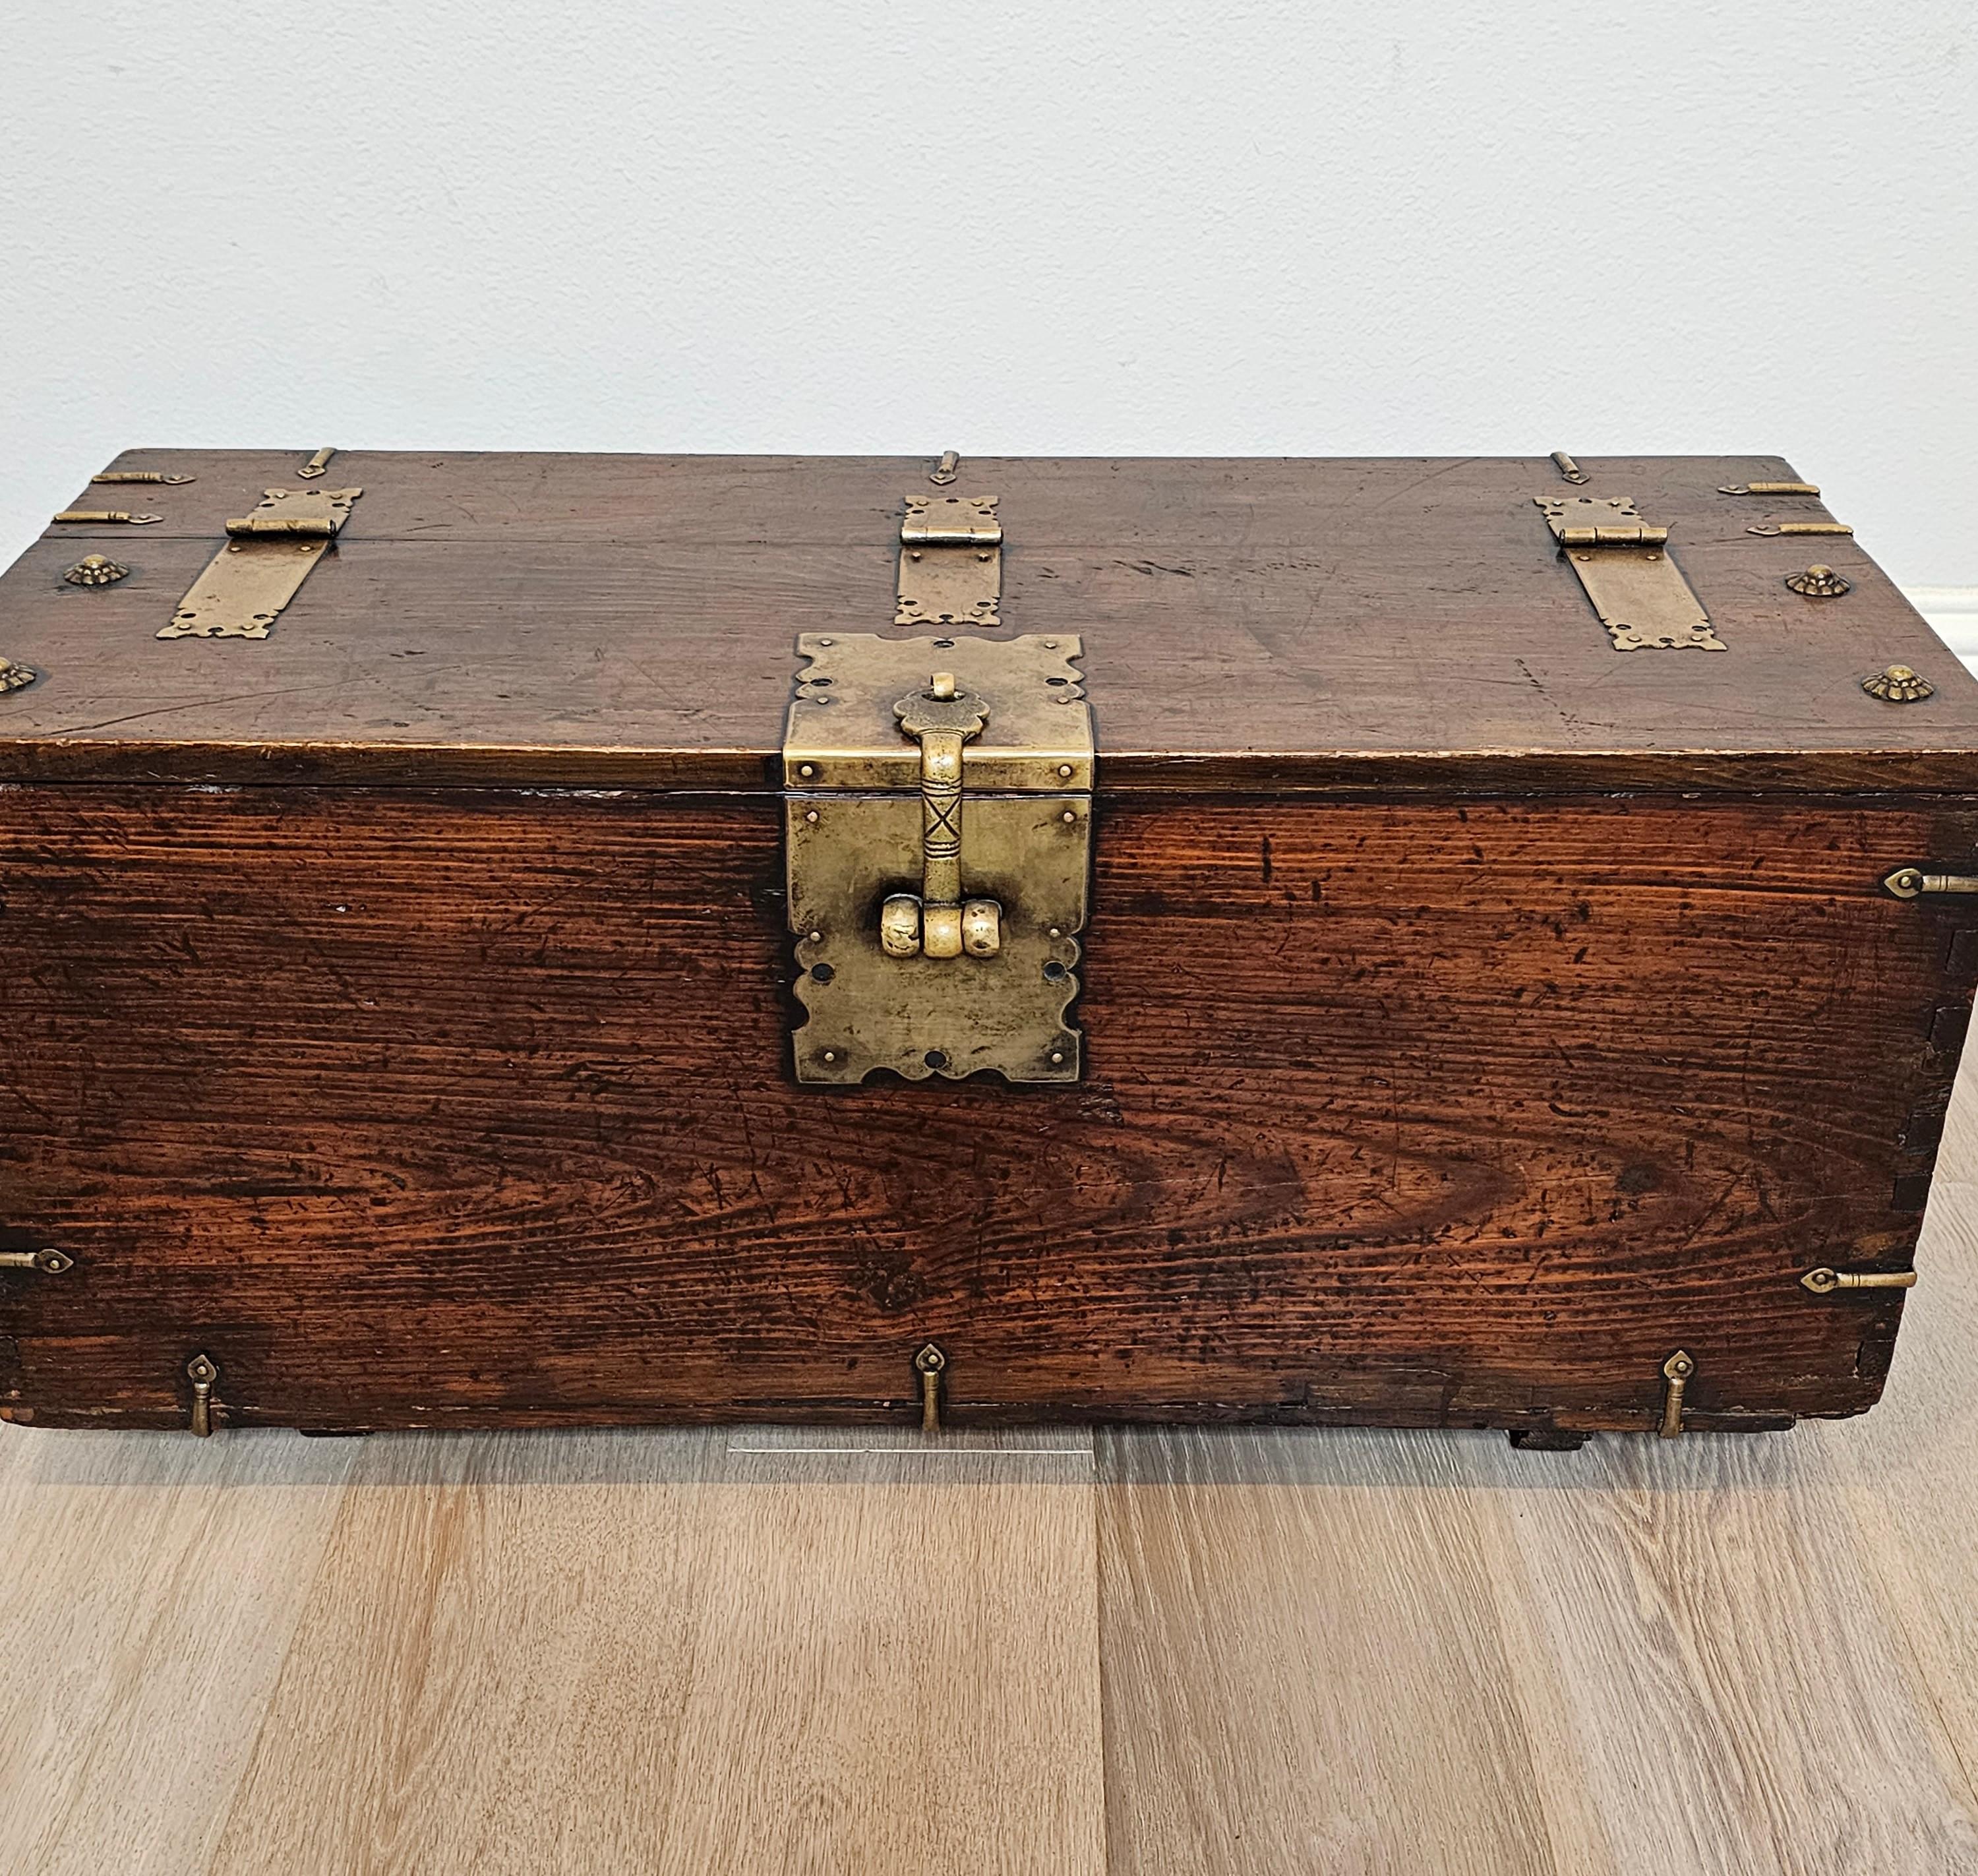 Hand-Crafted 19th Century Korean Brass Mounted Wood Money Chest